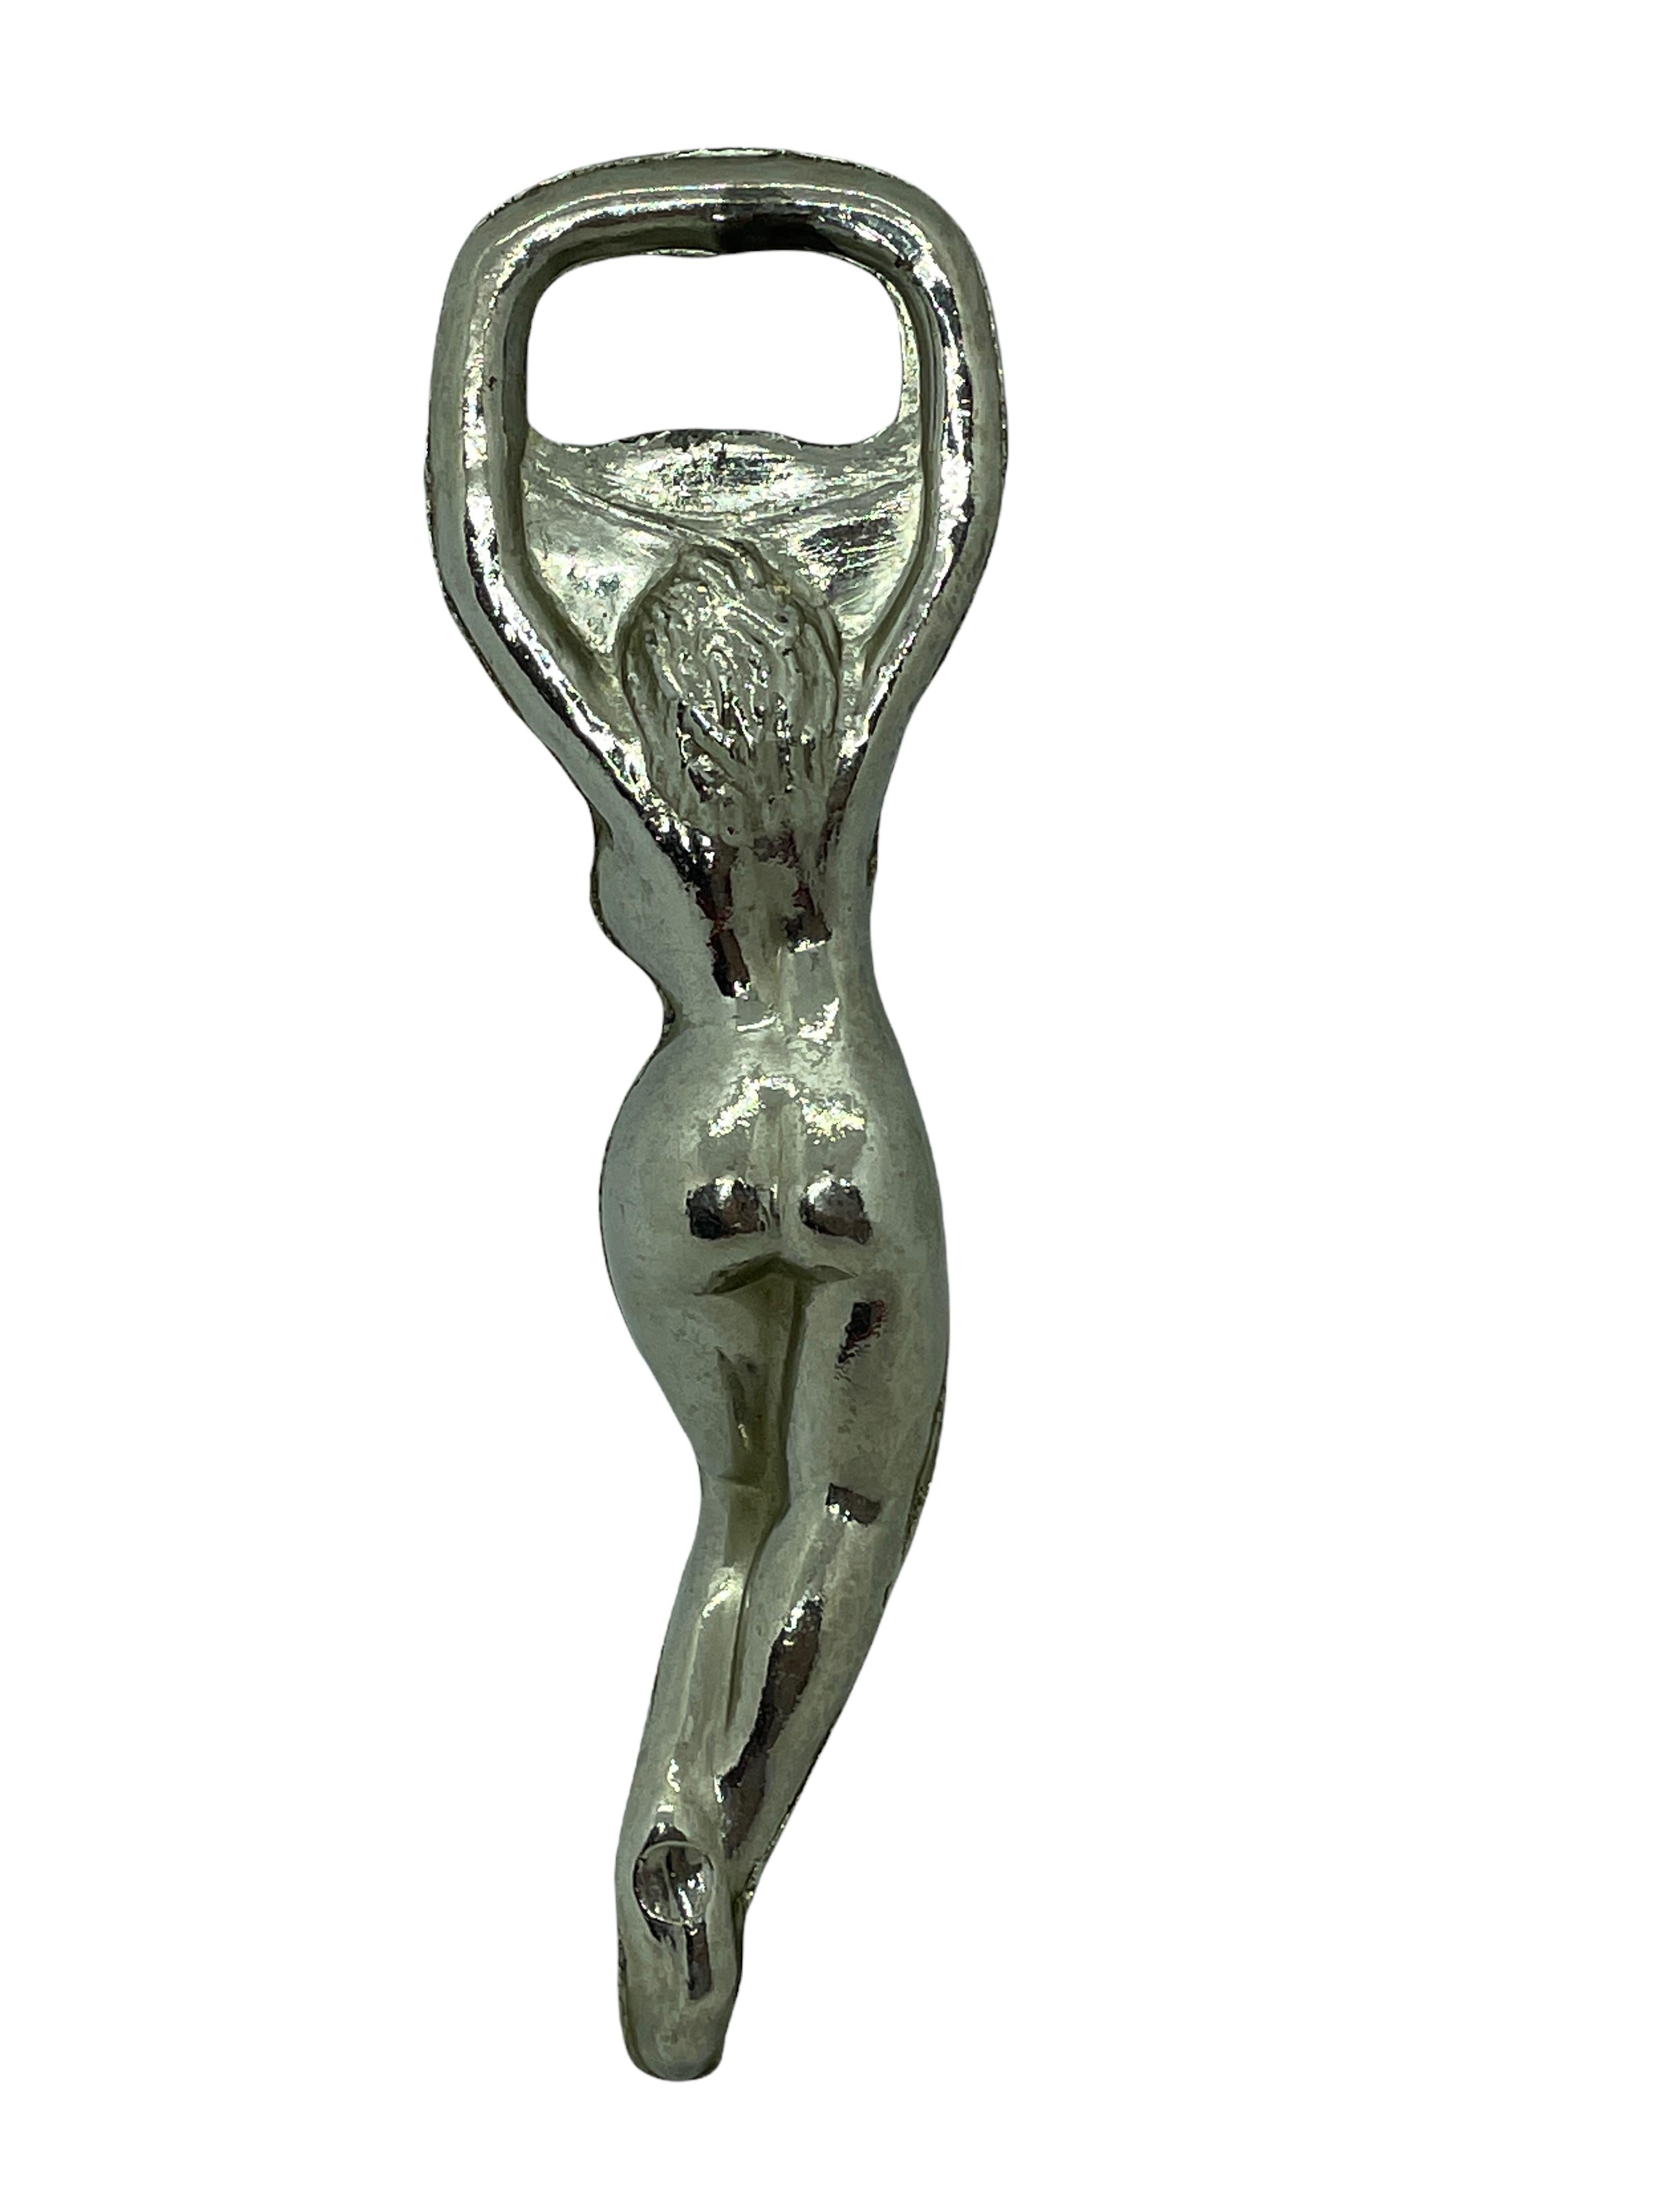 Classic early 1960s bottle opener. Nice addition to your room or just for use at your bar or bar cart. Found at an estate sale in Vienna, Austria.